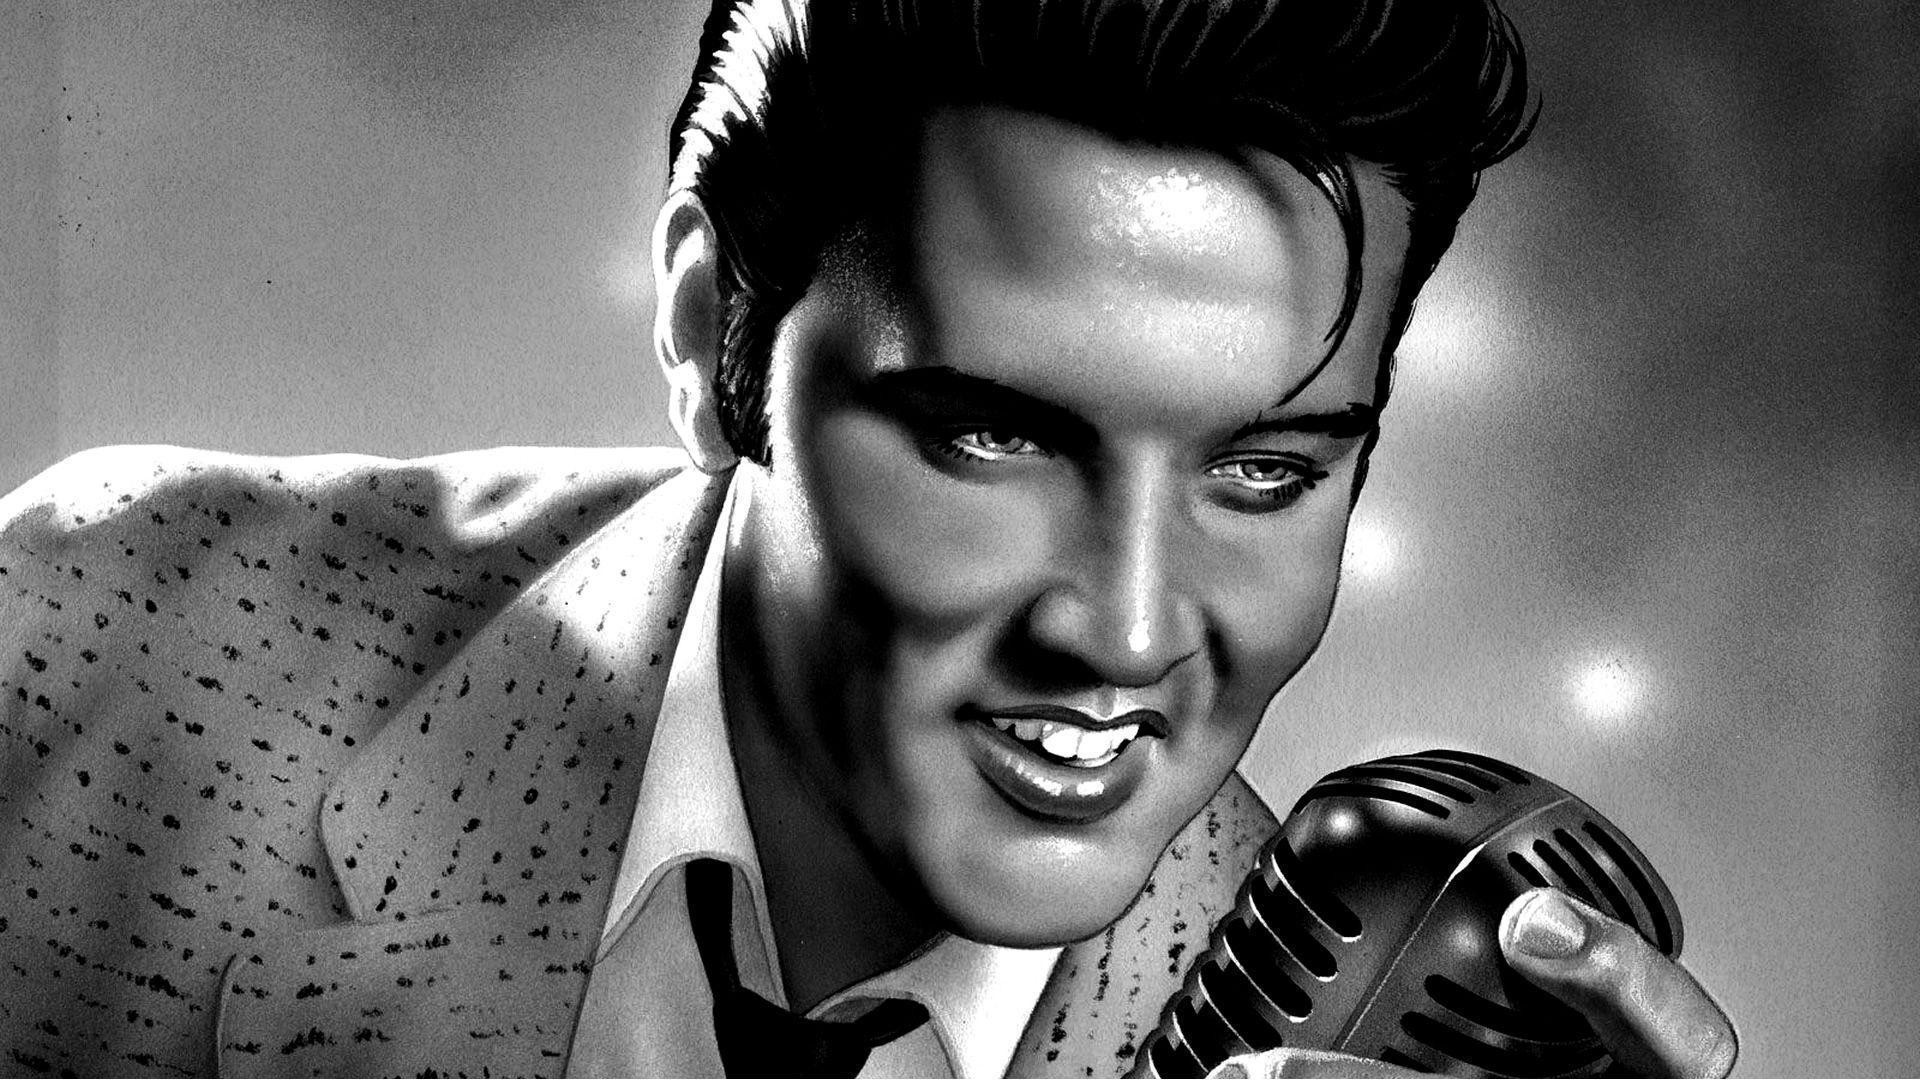 1920x1080 Elvis Presley Wallpapers High Resolution and Quality Download